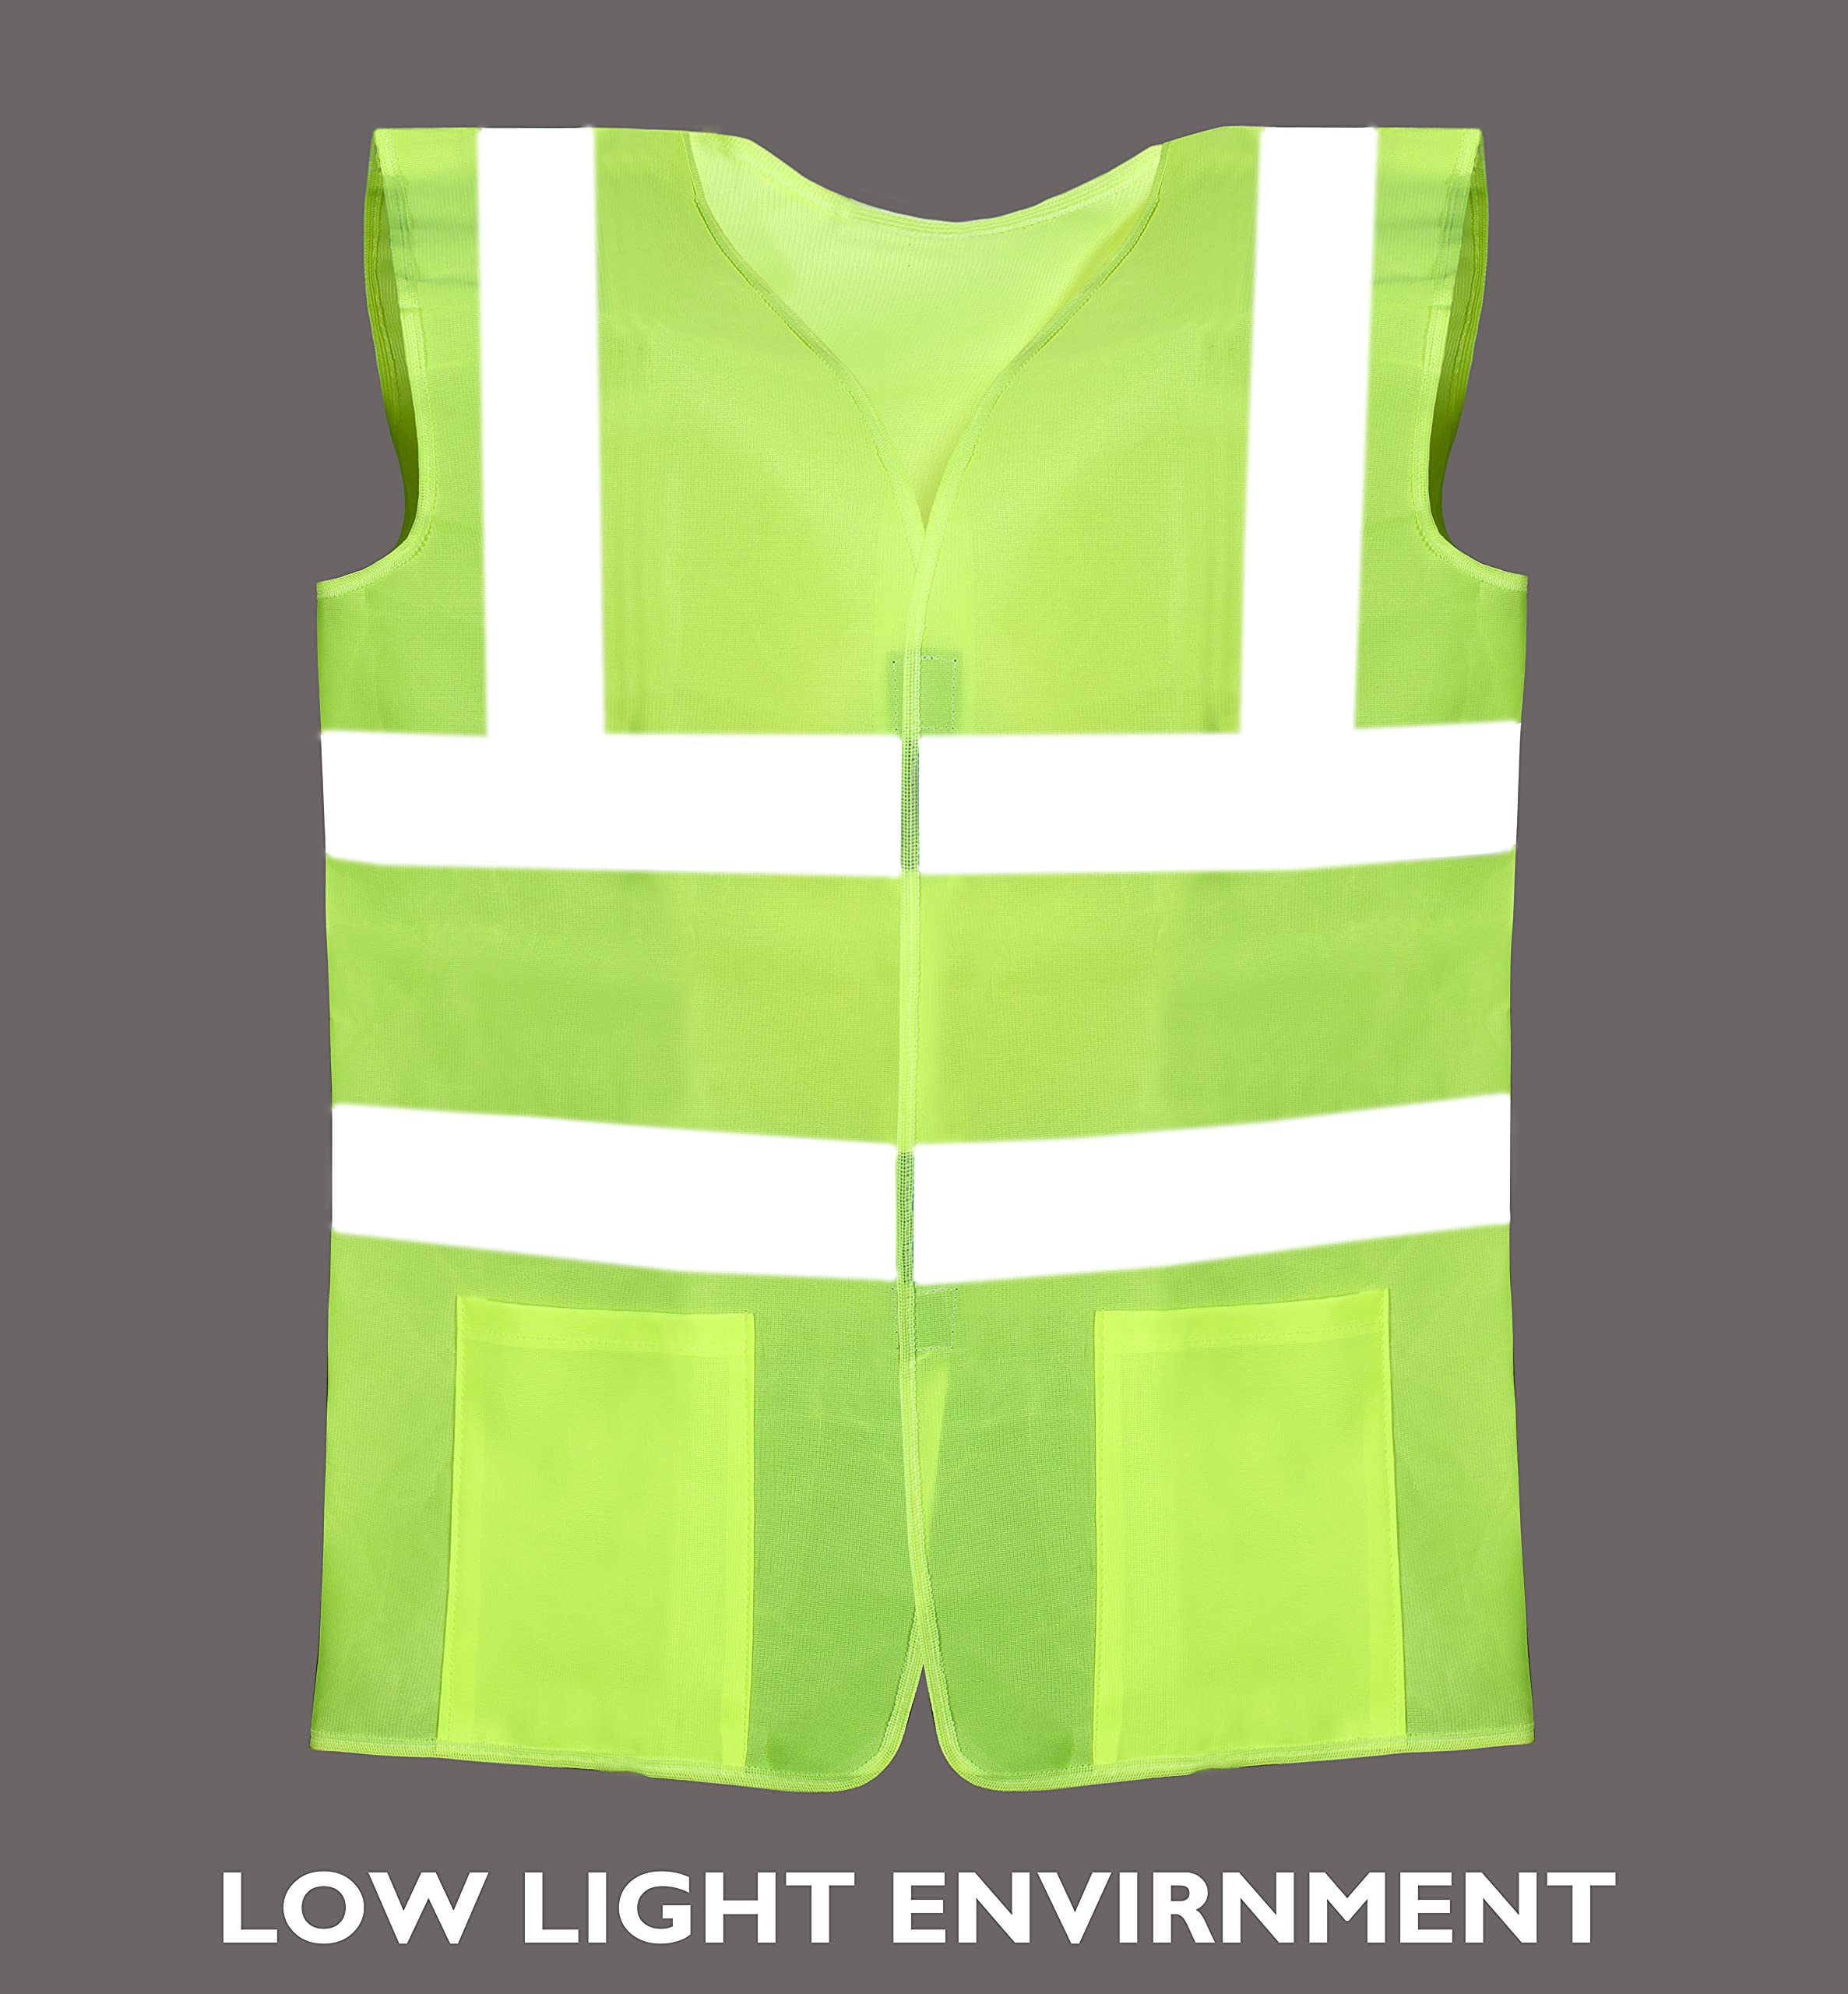 THE CLOWNFISH Hi-Vis Reflective Safety Vest Unisex Polyester Workwear Jacket Safety Coat with Reflective Tape for Traffic Sports Construction Site (XL, Green)